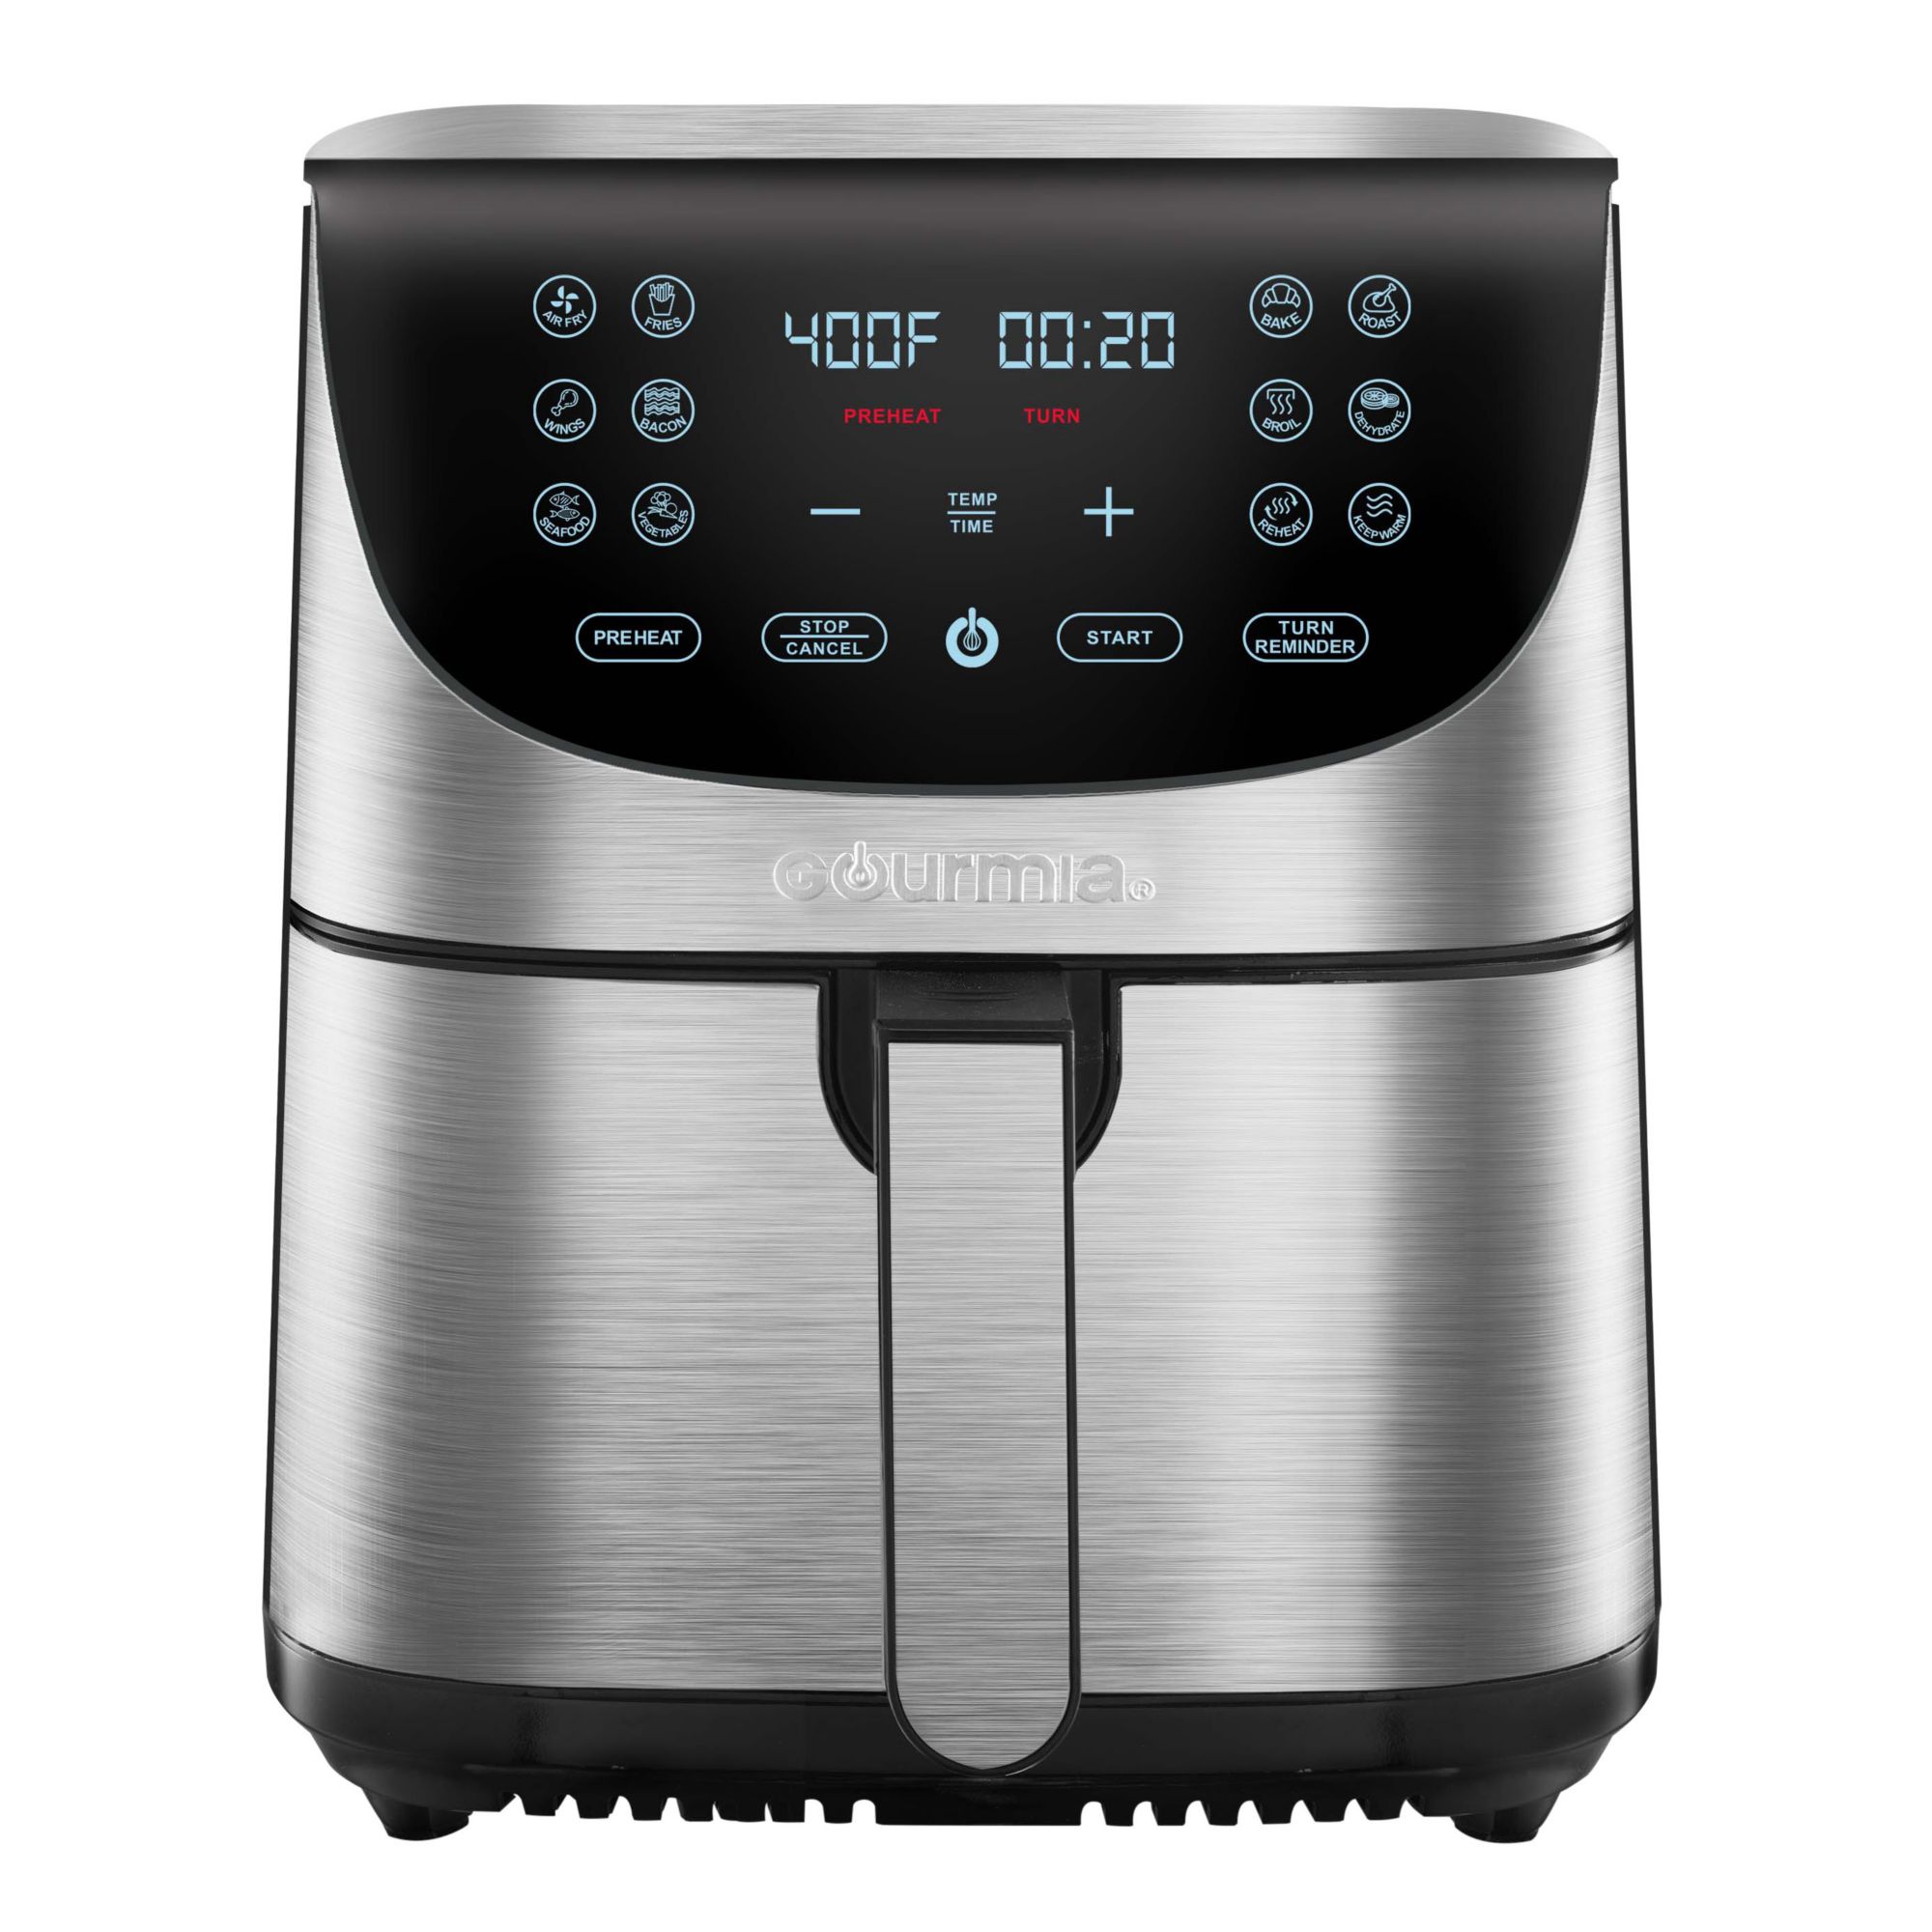 Air Fryers, Gourmia GTF7650 24-in-1 Multi-function, Digital Stainless Steel Air  Fryer Oven - 0.7 Cu. Ft. Includes 24 Cooking Presets with Convection Mode -  Fry Basket, Oven Rack, Baking Pan & Crumb